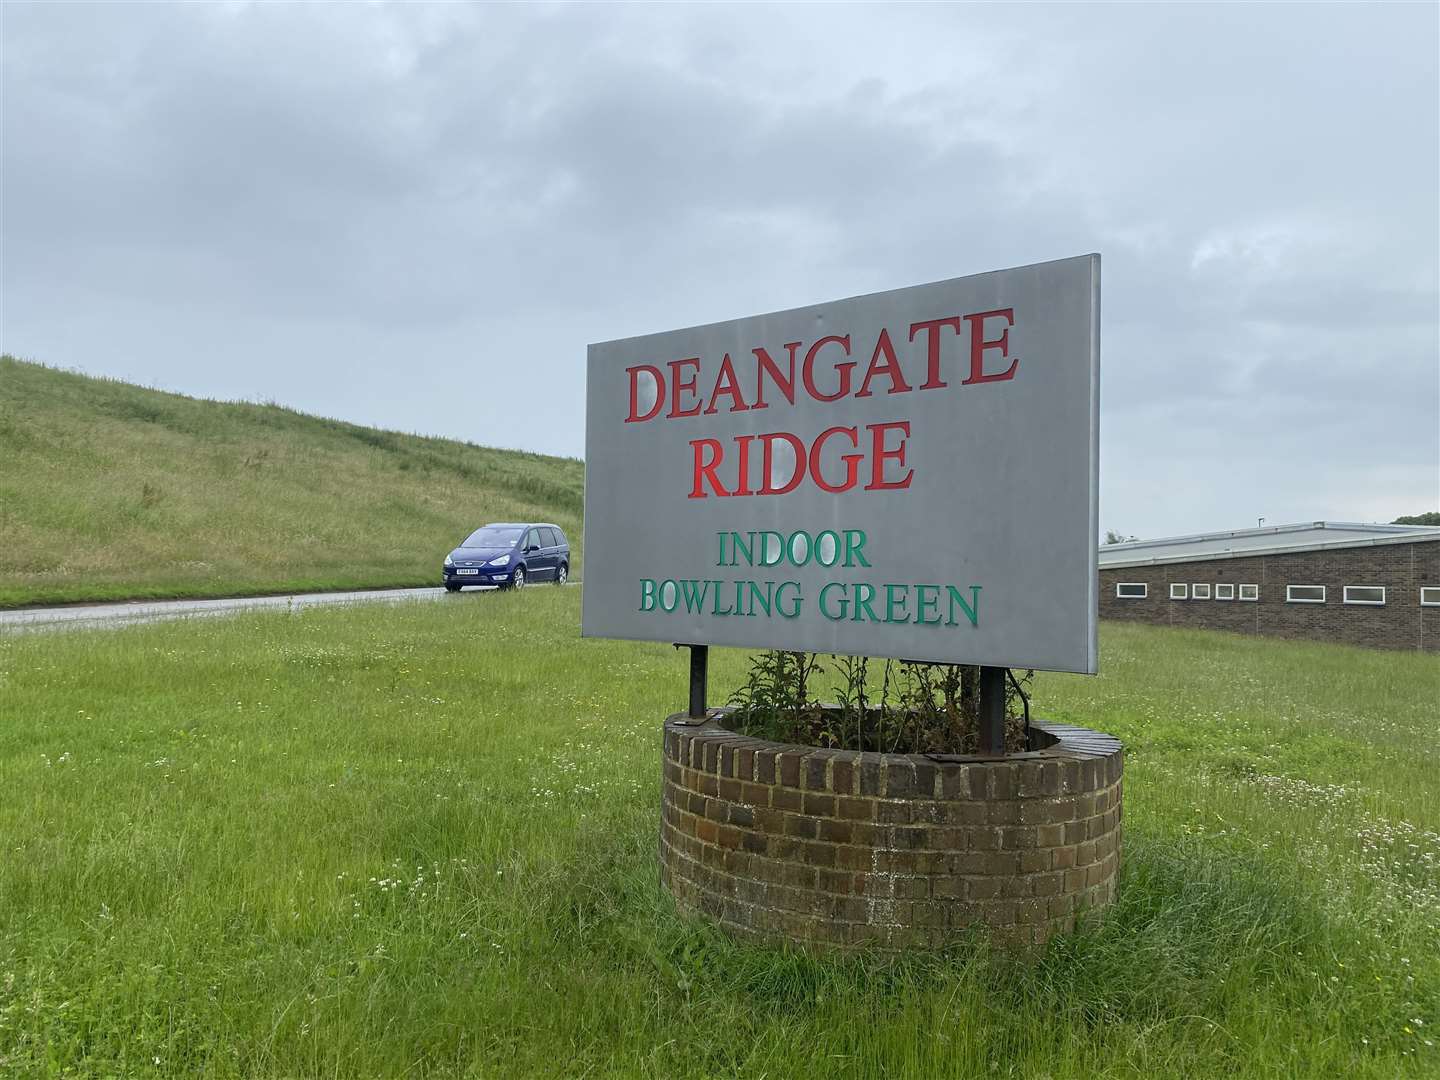 Deangate Ridge is set to have new roads built over part of the site under plans announced by Medway Council in its £170m Housing Infrastructure Fund bid